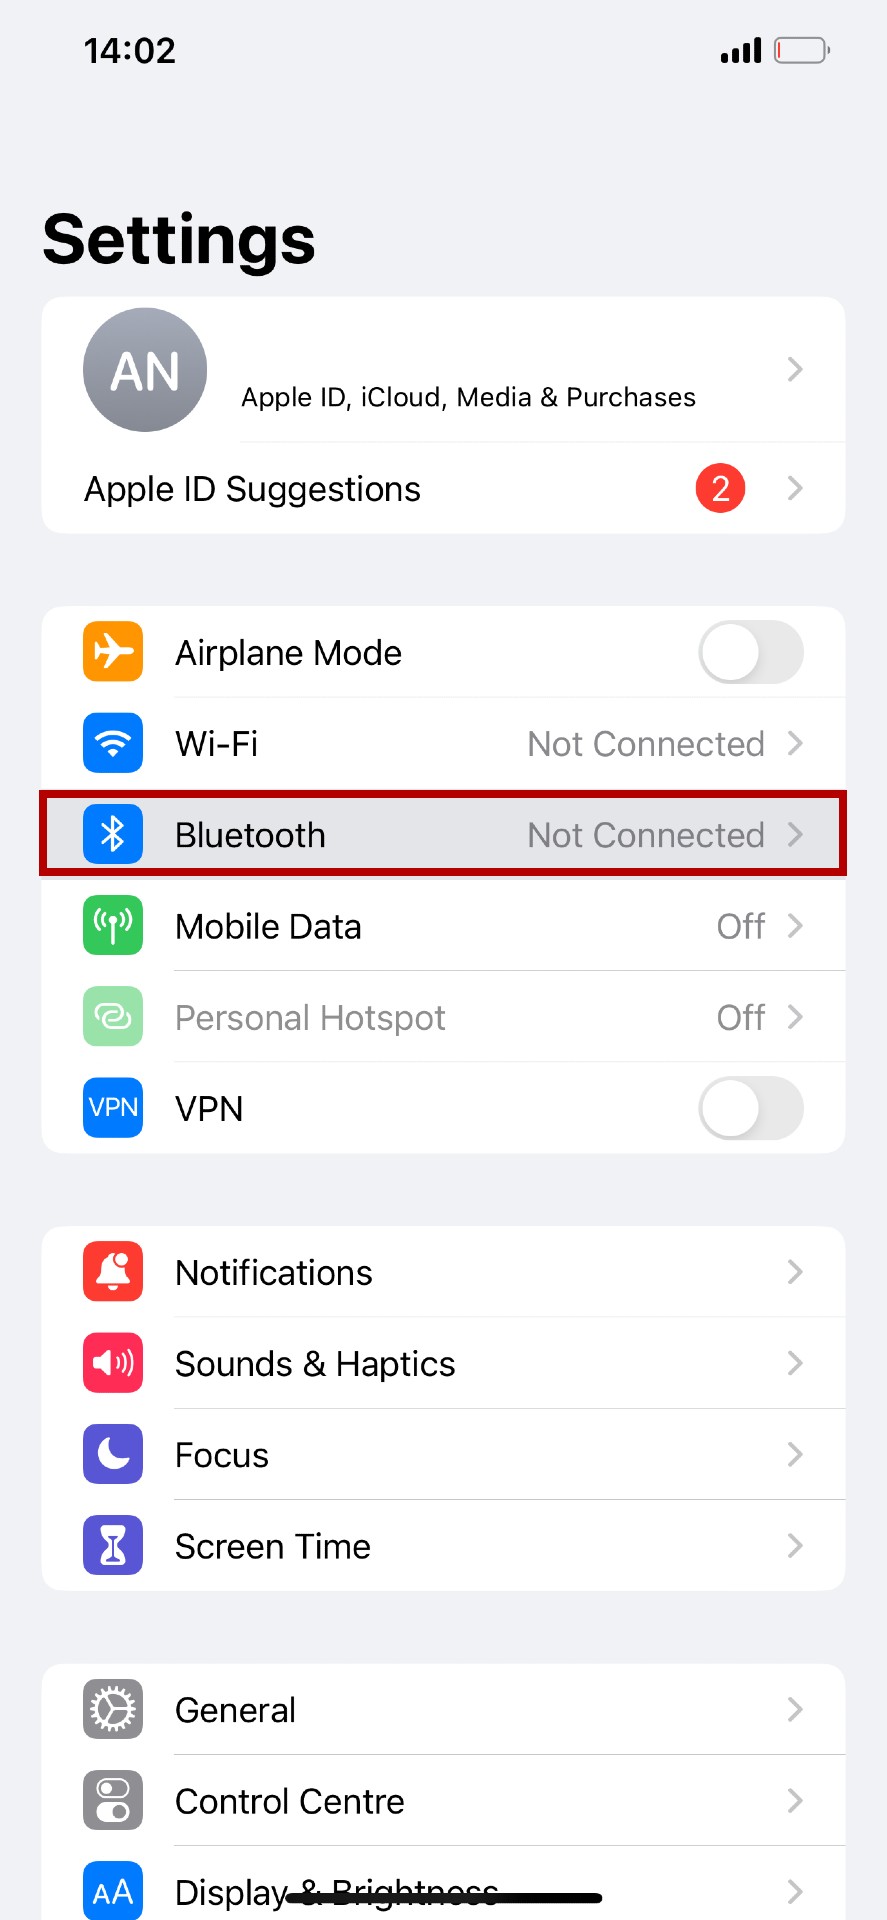 The iOS Settings page